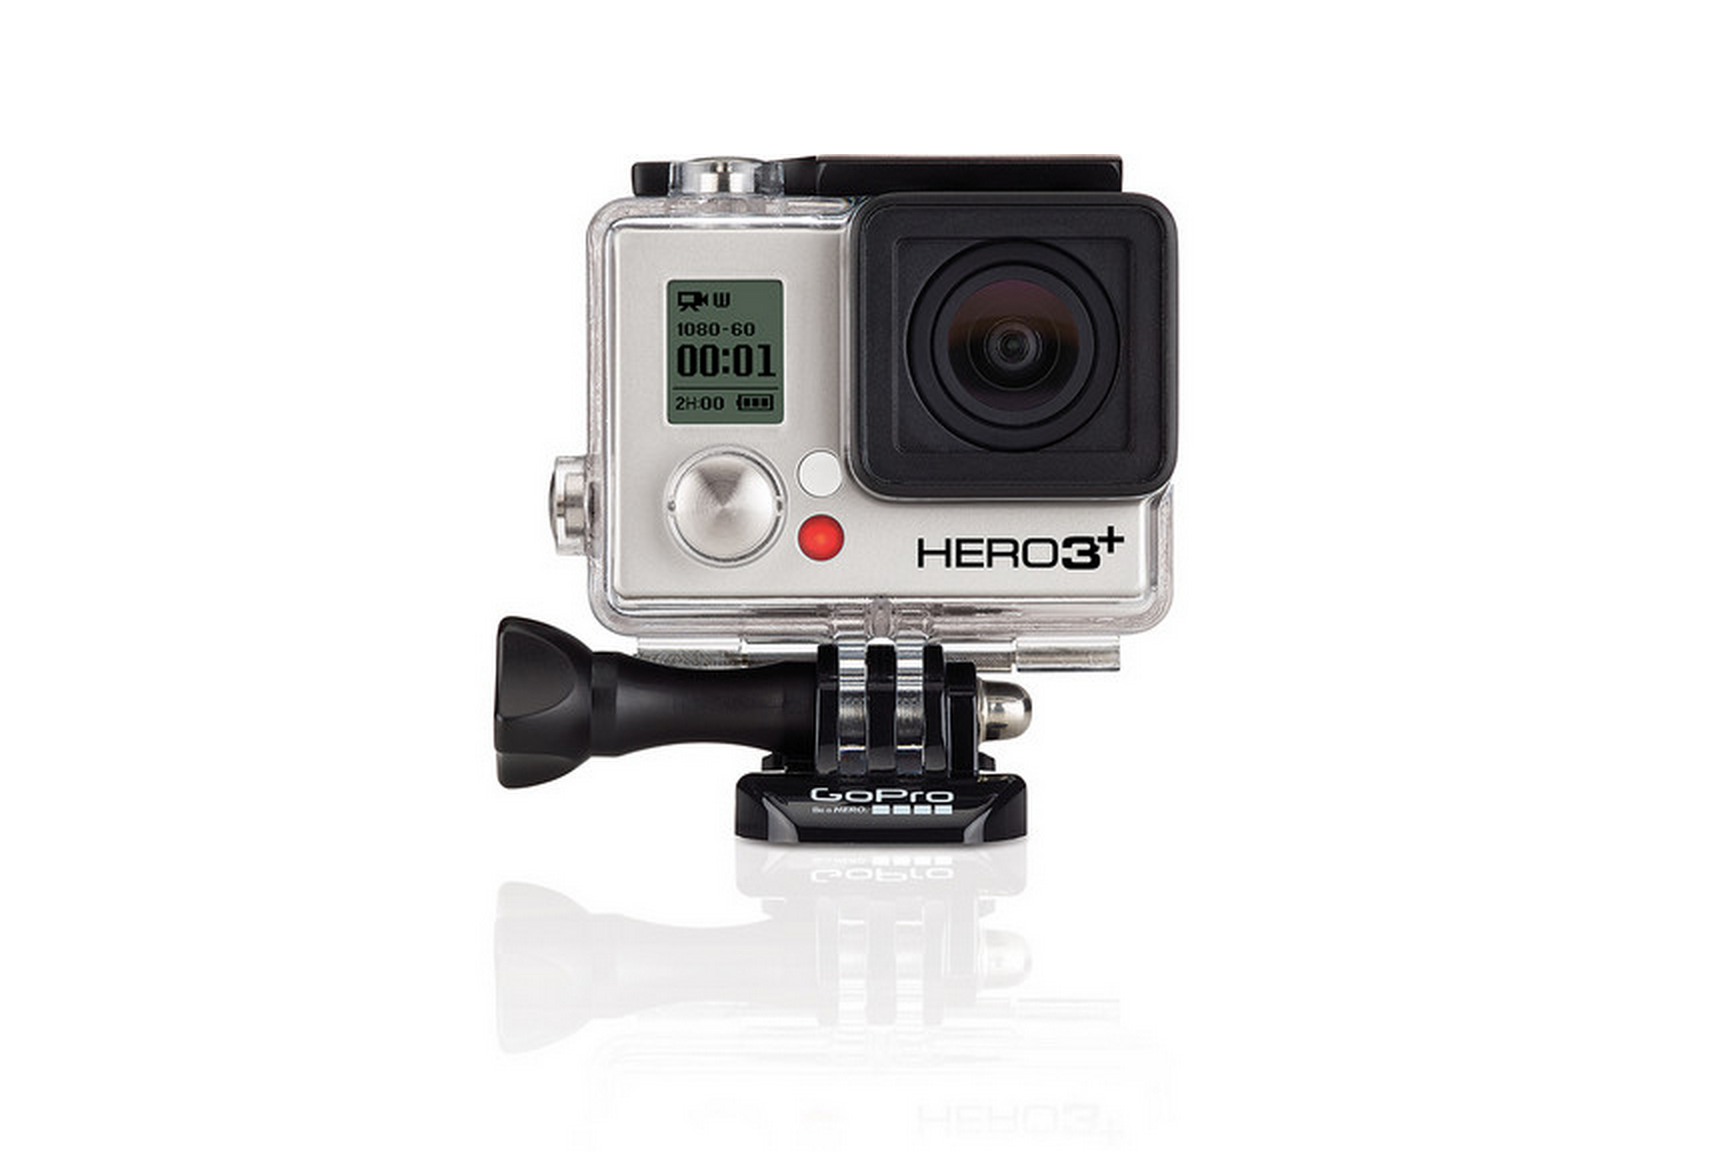 GoPro Releases Newest Camera To The World